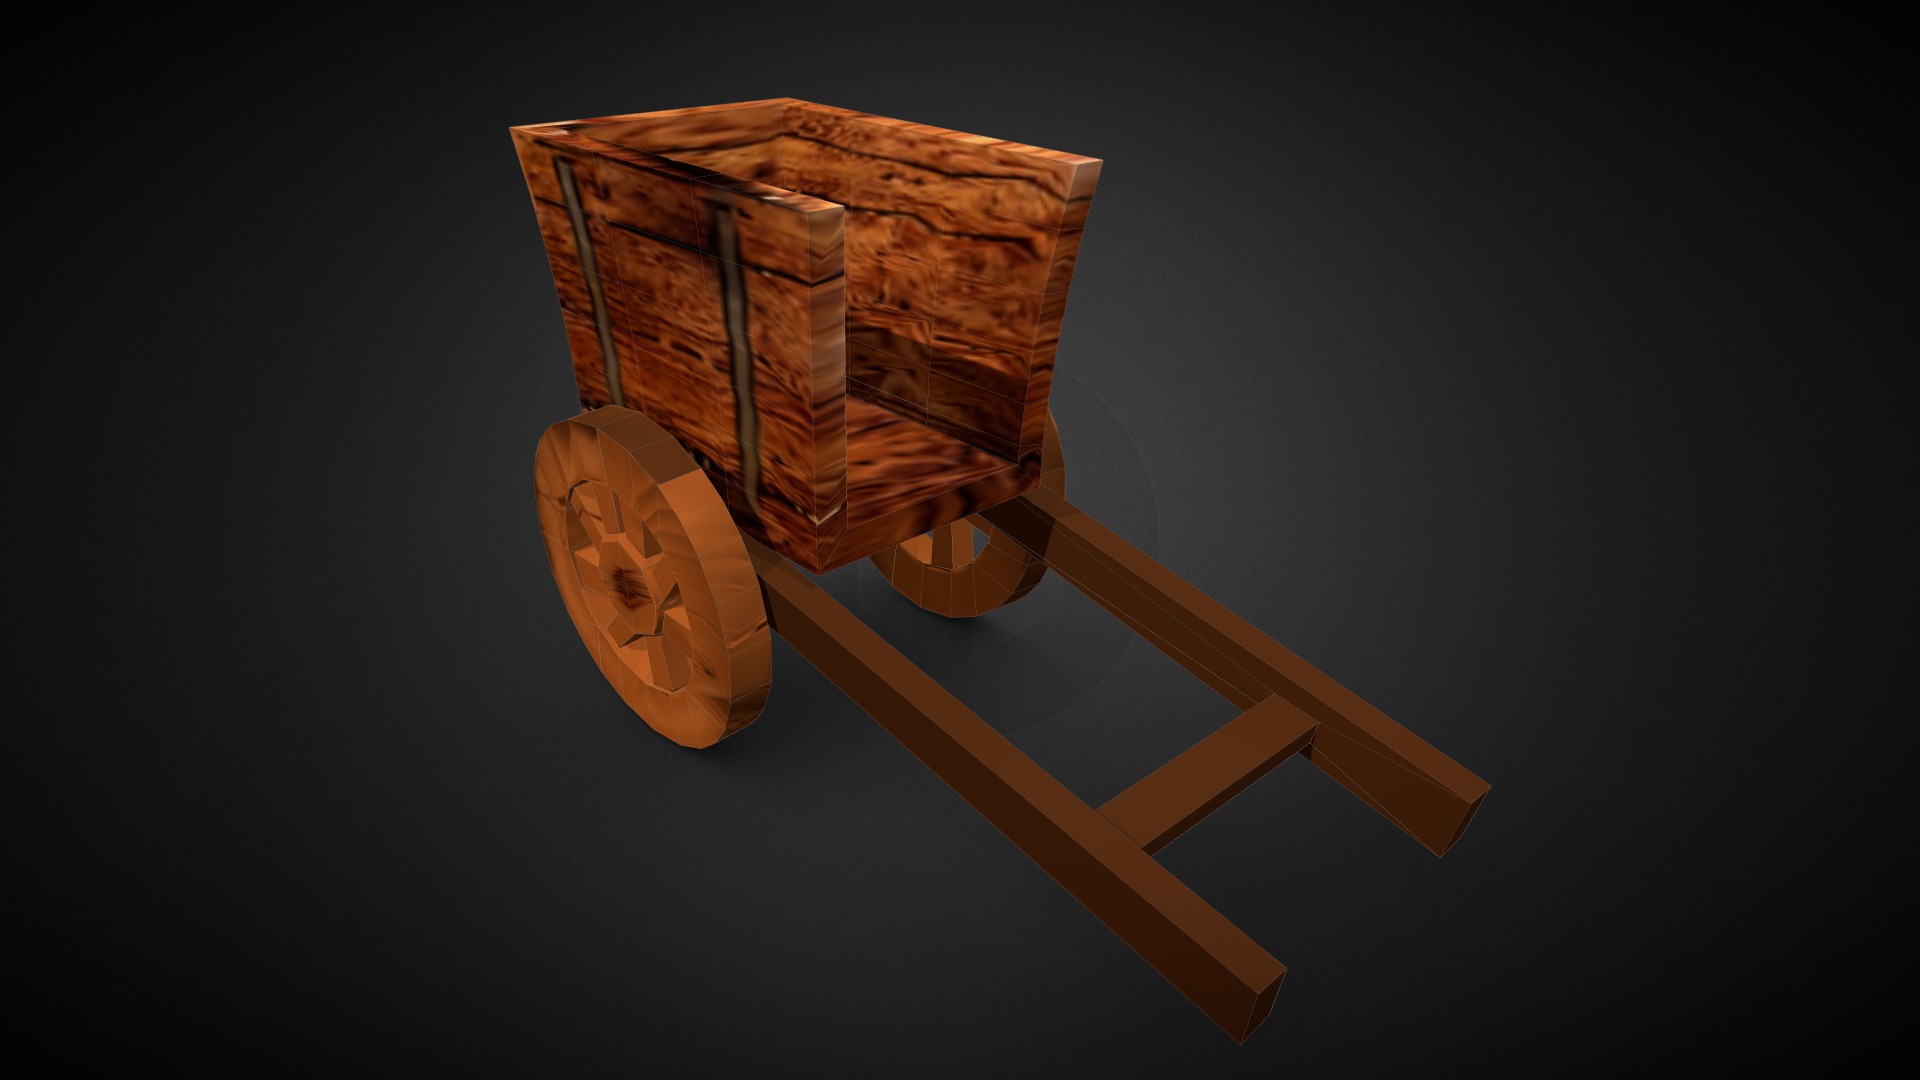 3D model Horsewaggon - This is a 3D model of the Horsewaggon. The 3D model is about a wooden model of a house.